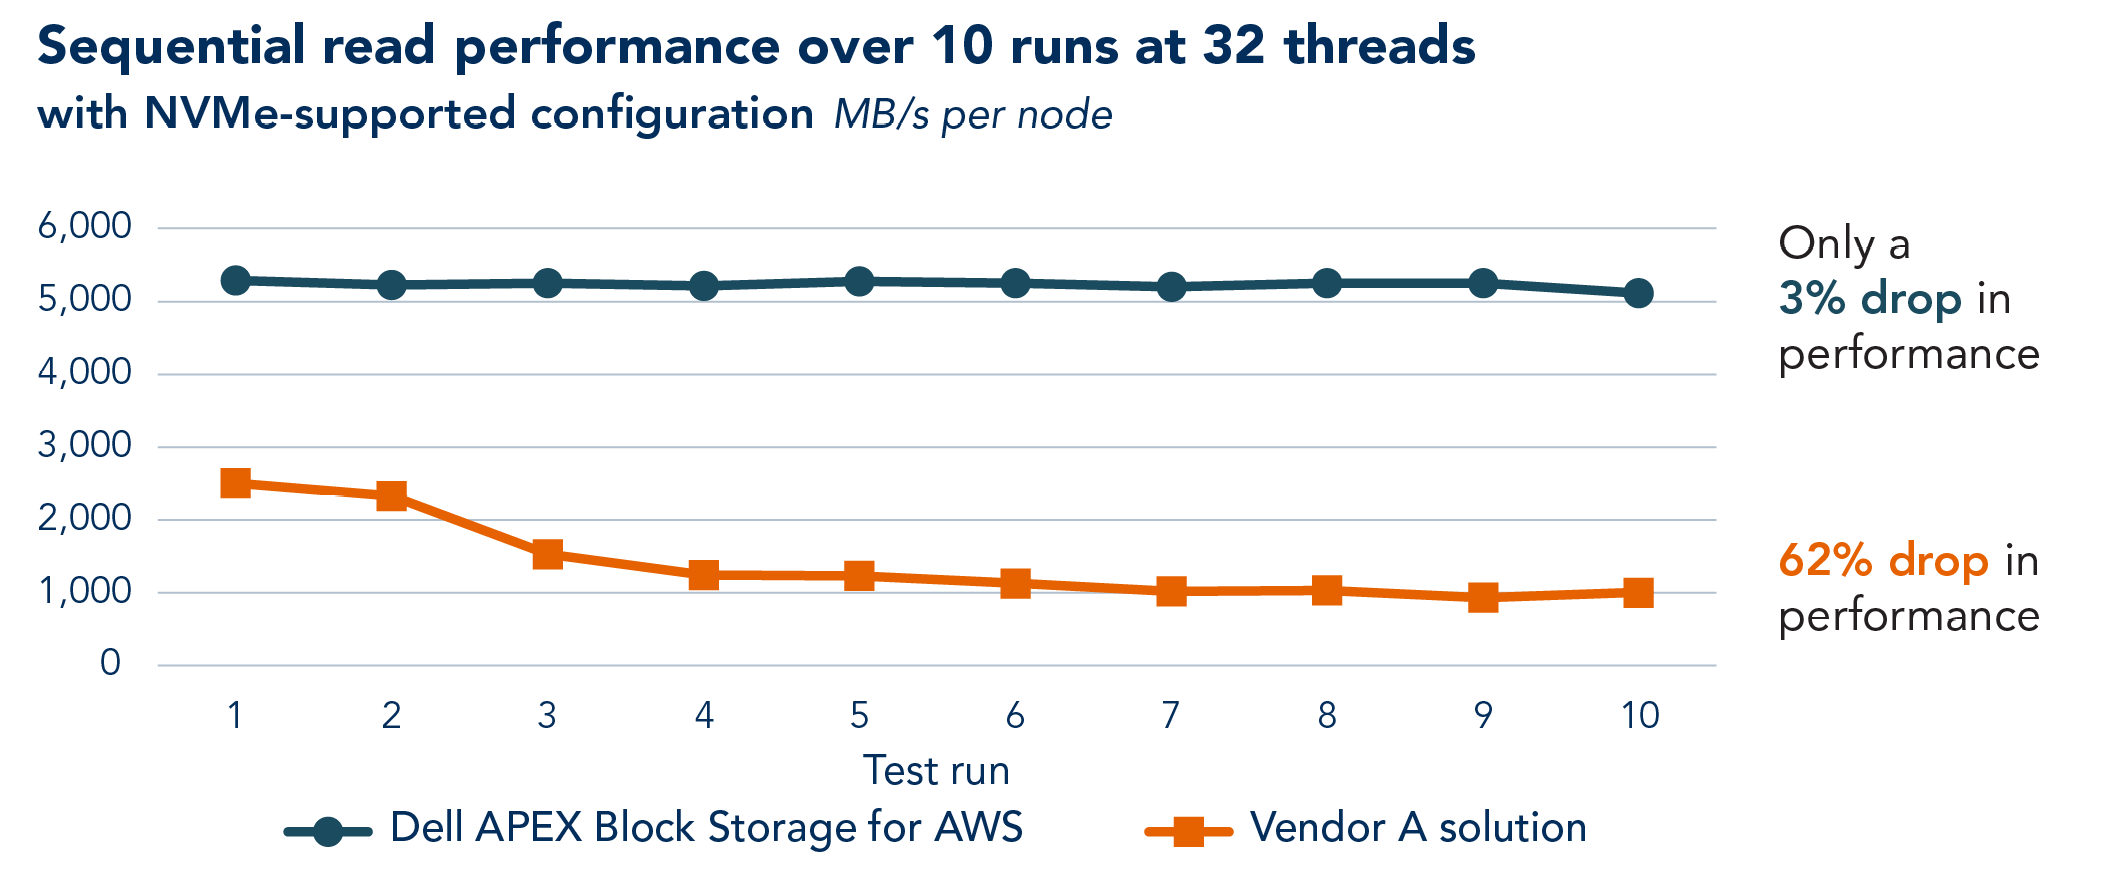 Chart showing the sequential read performance, over 10 runs of Vdbench at 32 threads, of the Dell APEX Block Storage for AWS solution and the Vendor A solution in their NVMe-supported configurations. Higher, more stable performance is better. The Dell APEX solution holds about steady just over 5,000 MB/s per node across the 10 runs, and the chart notes only a 3% drop in performance. The Vendor A solution starts the first run between 2,000 and 3,000 MB/s per node and drops over the course of the next four runs before staying at about the same place for runs 6 through 10, at about 1,000 MB/s per node. For the Vendor A solution, the chart notes a 62% drop in performance.